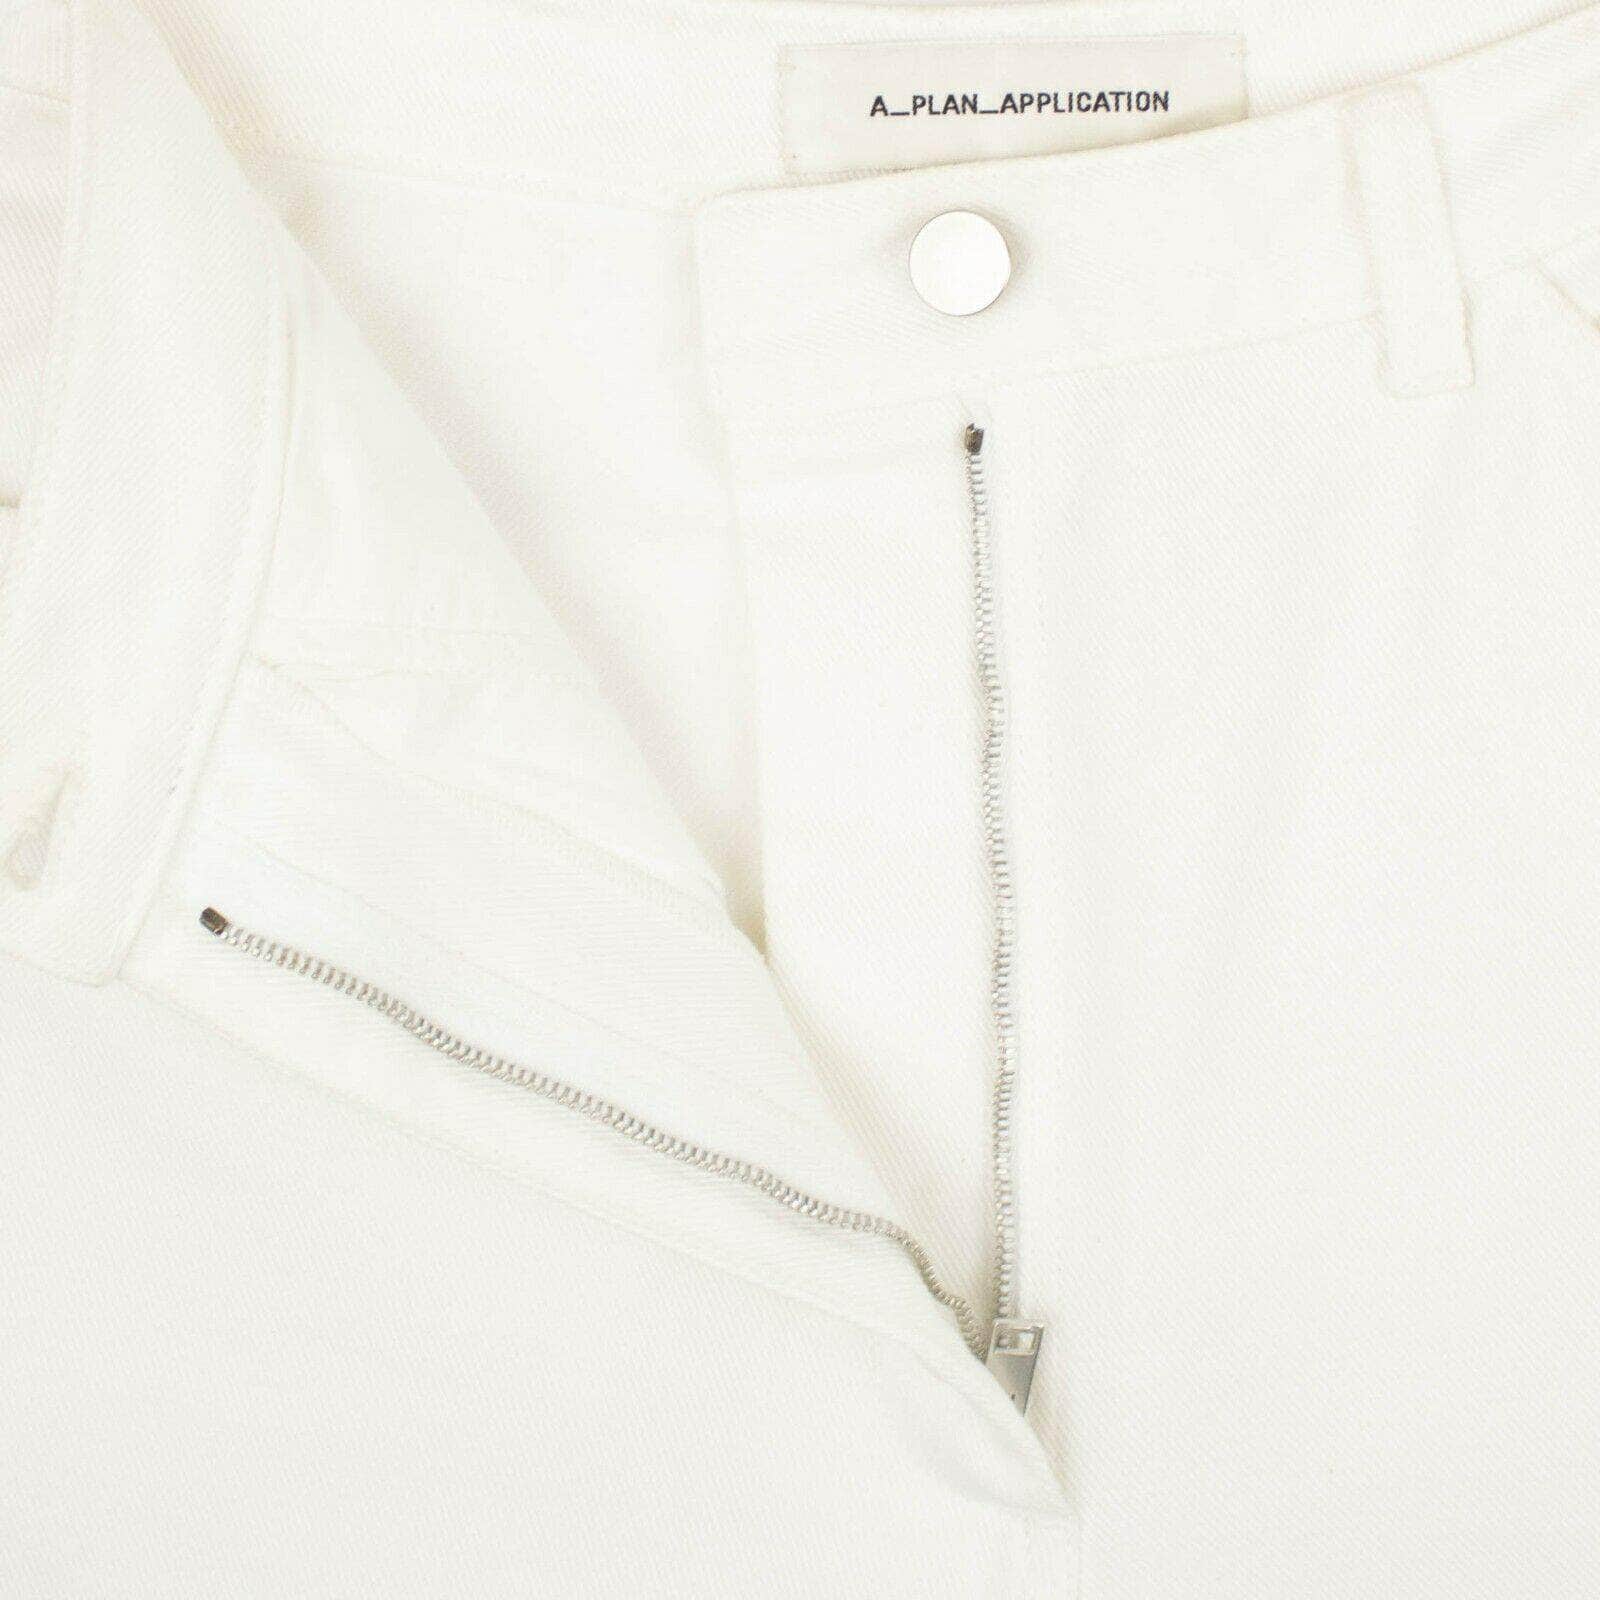 A_PLAN_APPLICATION a_plan_application, channelenable-all, couponcollection, gender-womens, main-clothing, size-27, under-250 27 White Denim Mid Rise Straight Jeans 82NGG-AP-45/27 82NGG-AP-45/27